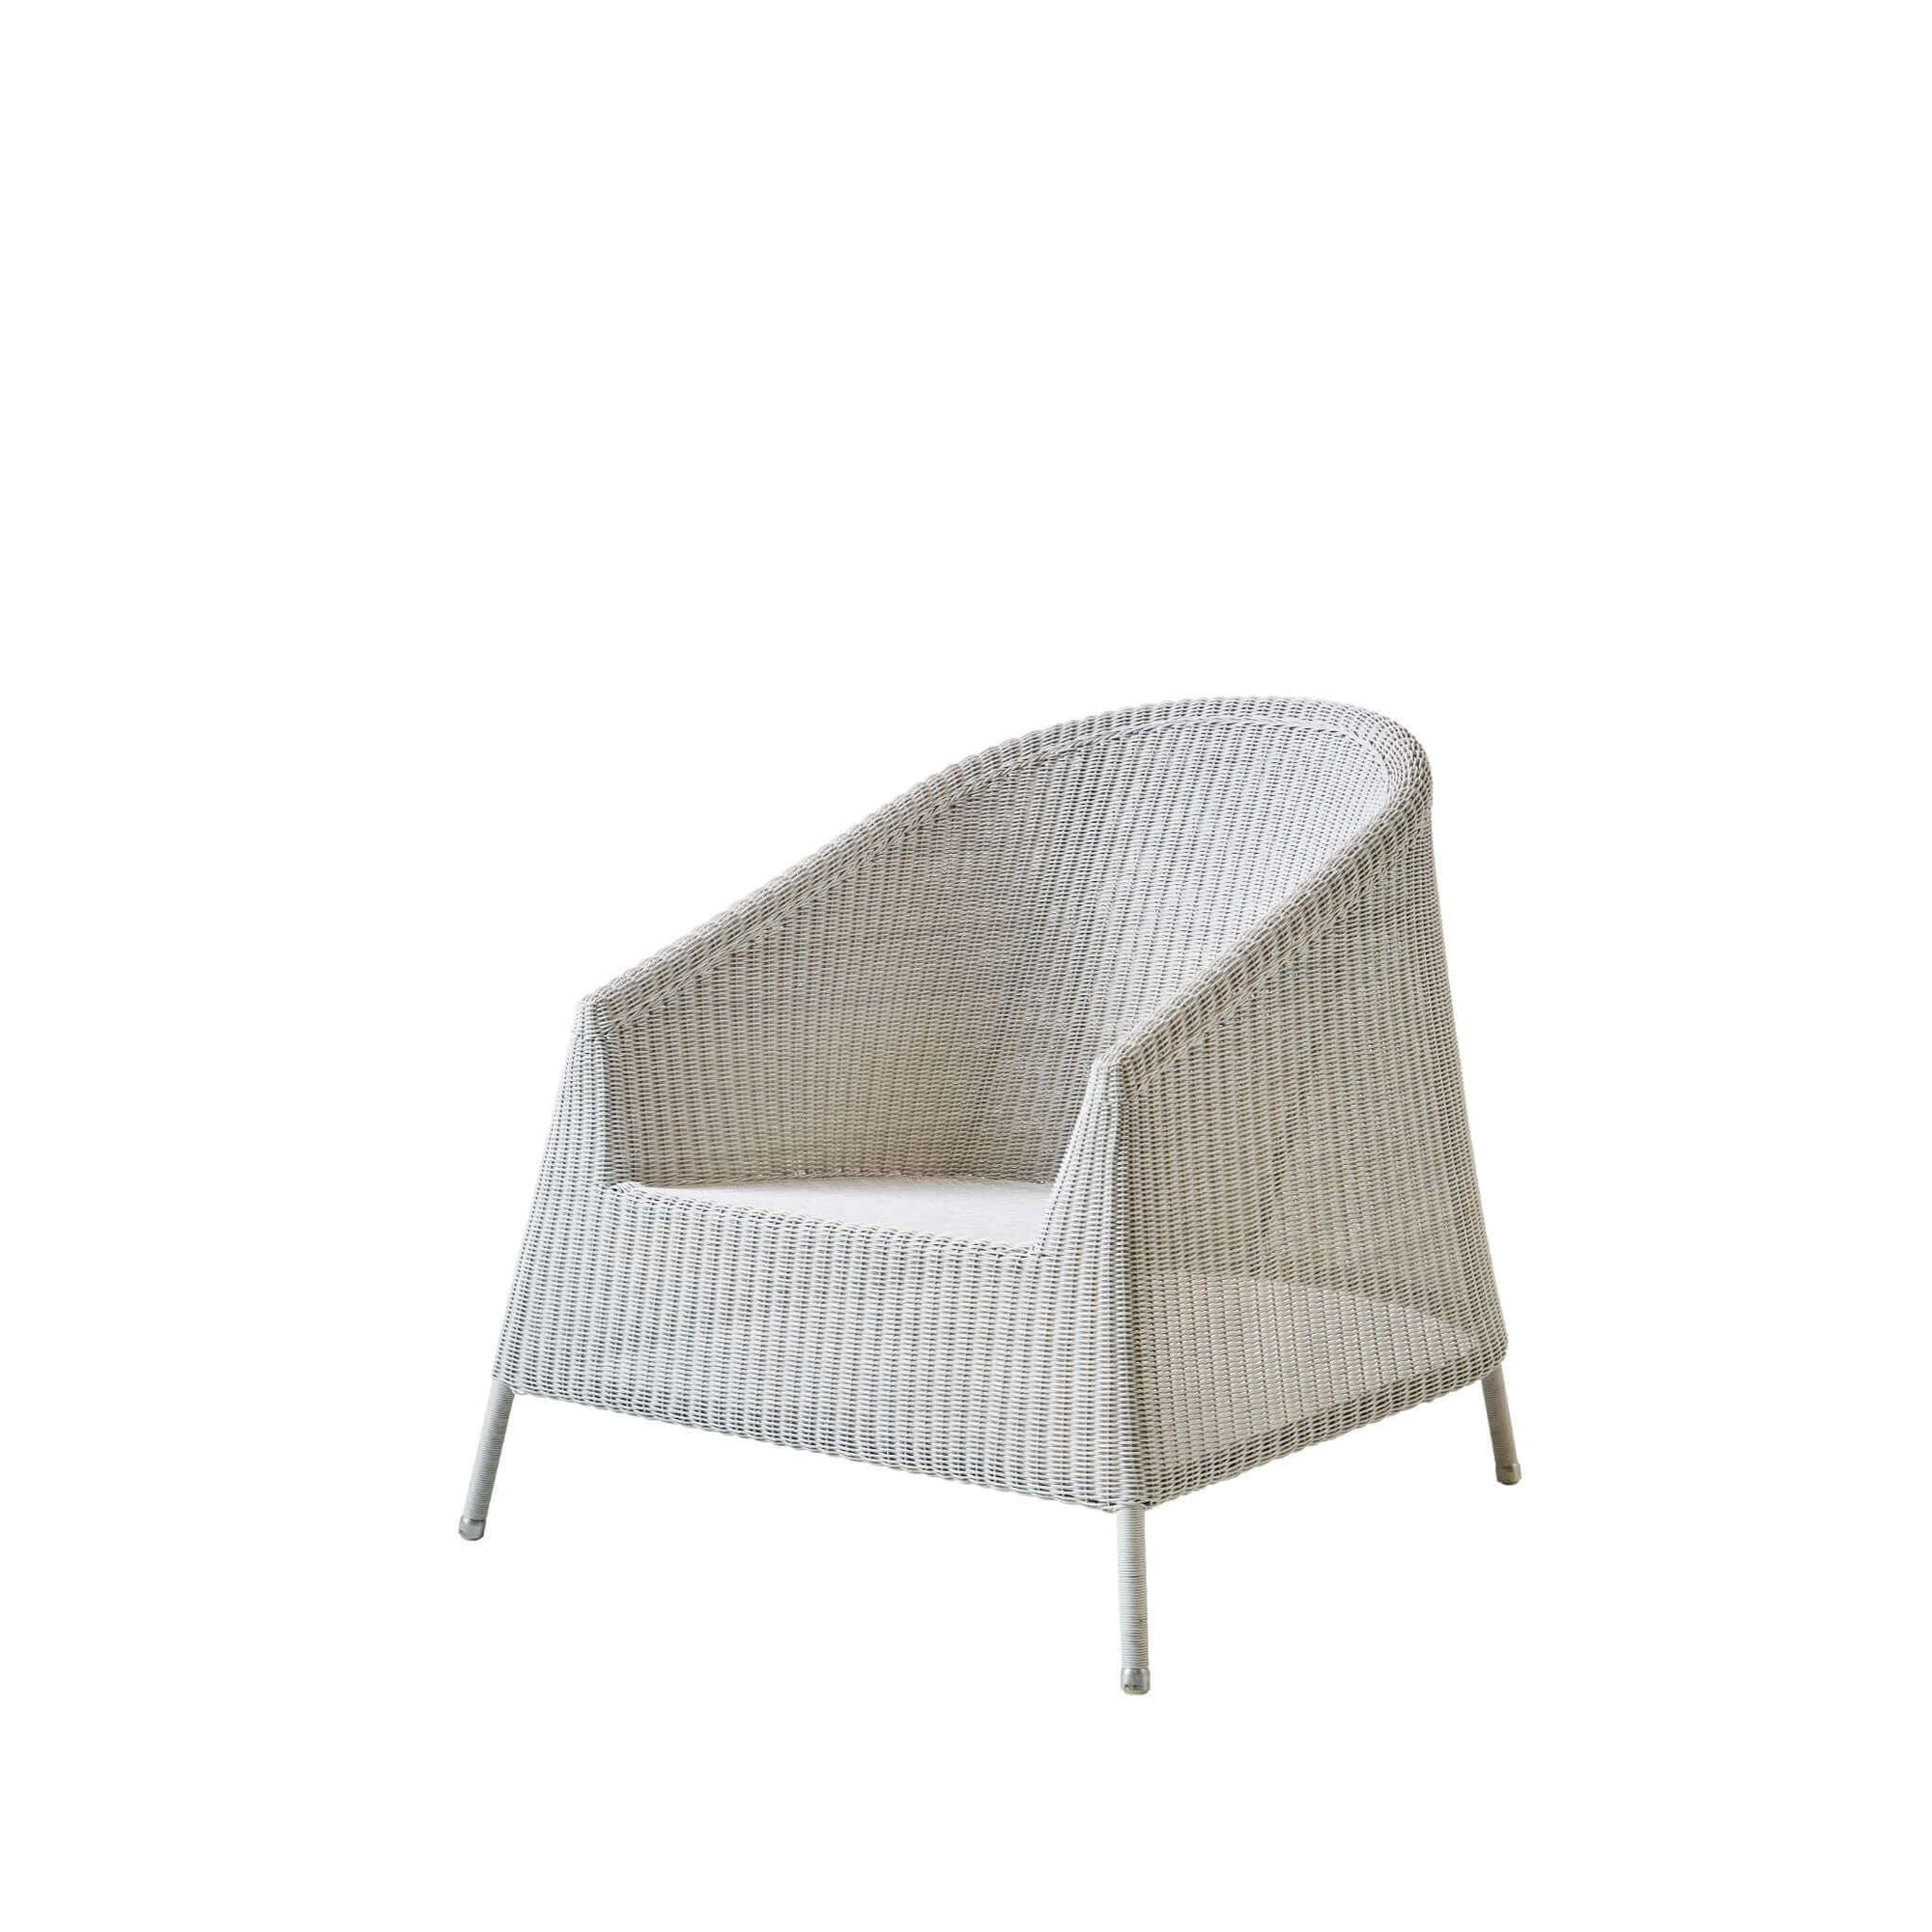 Cane-Line Kingston Lounge Chair, Stackable-Mocca, Cane-line Weave